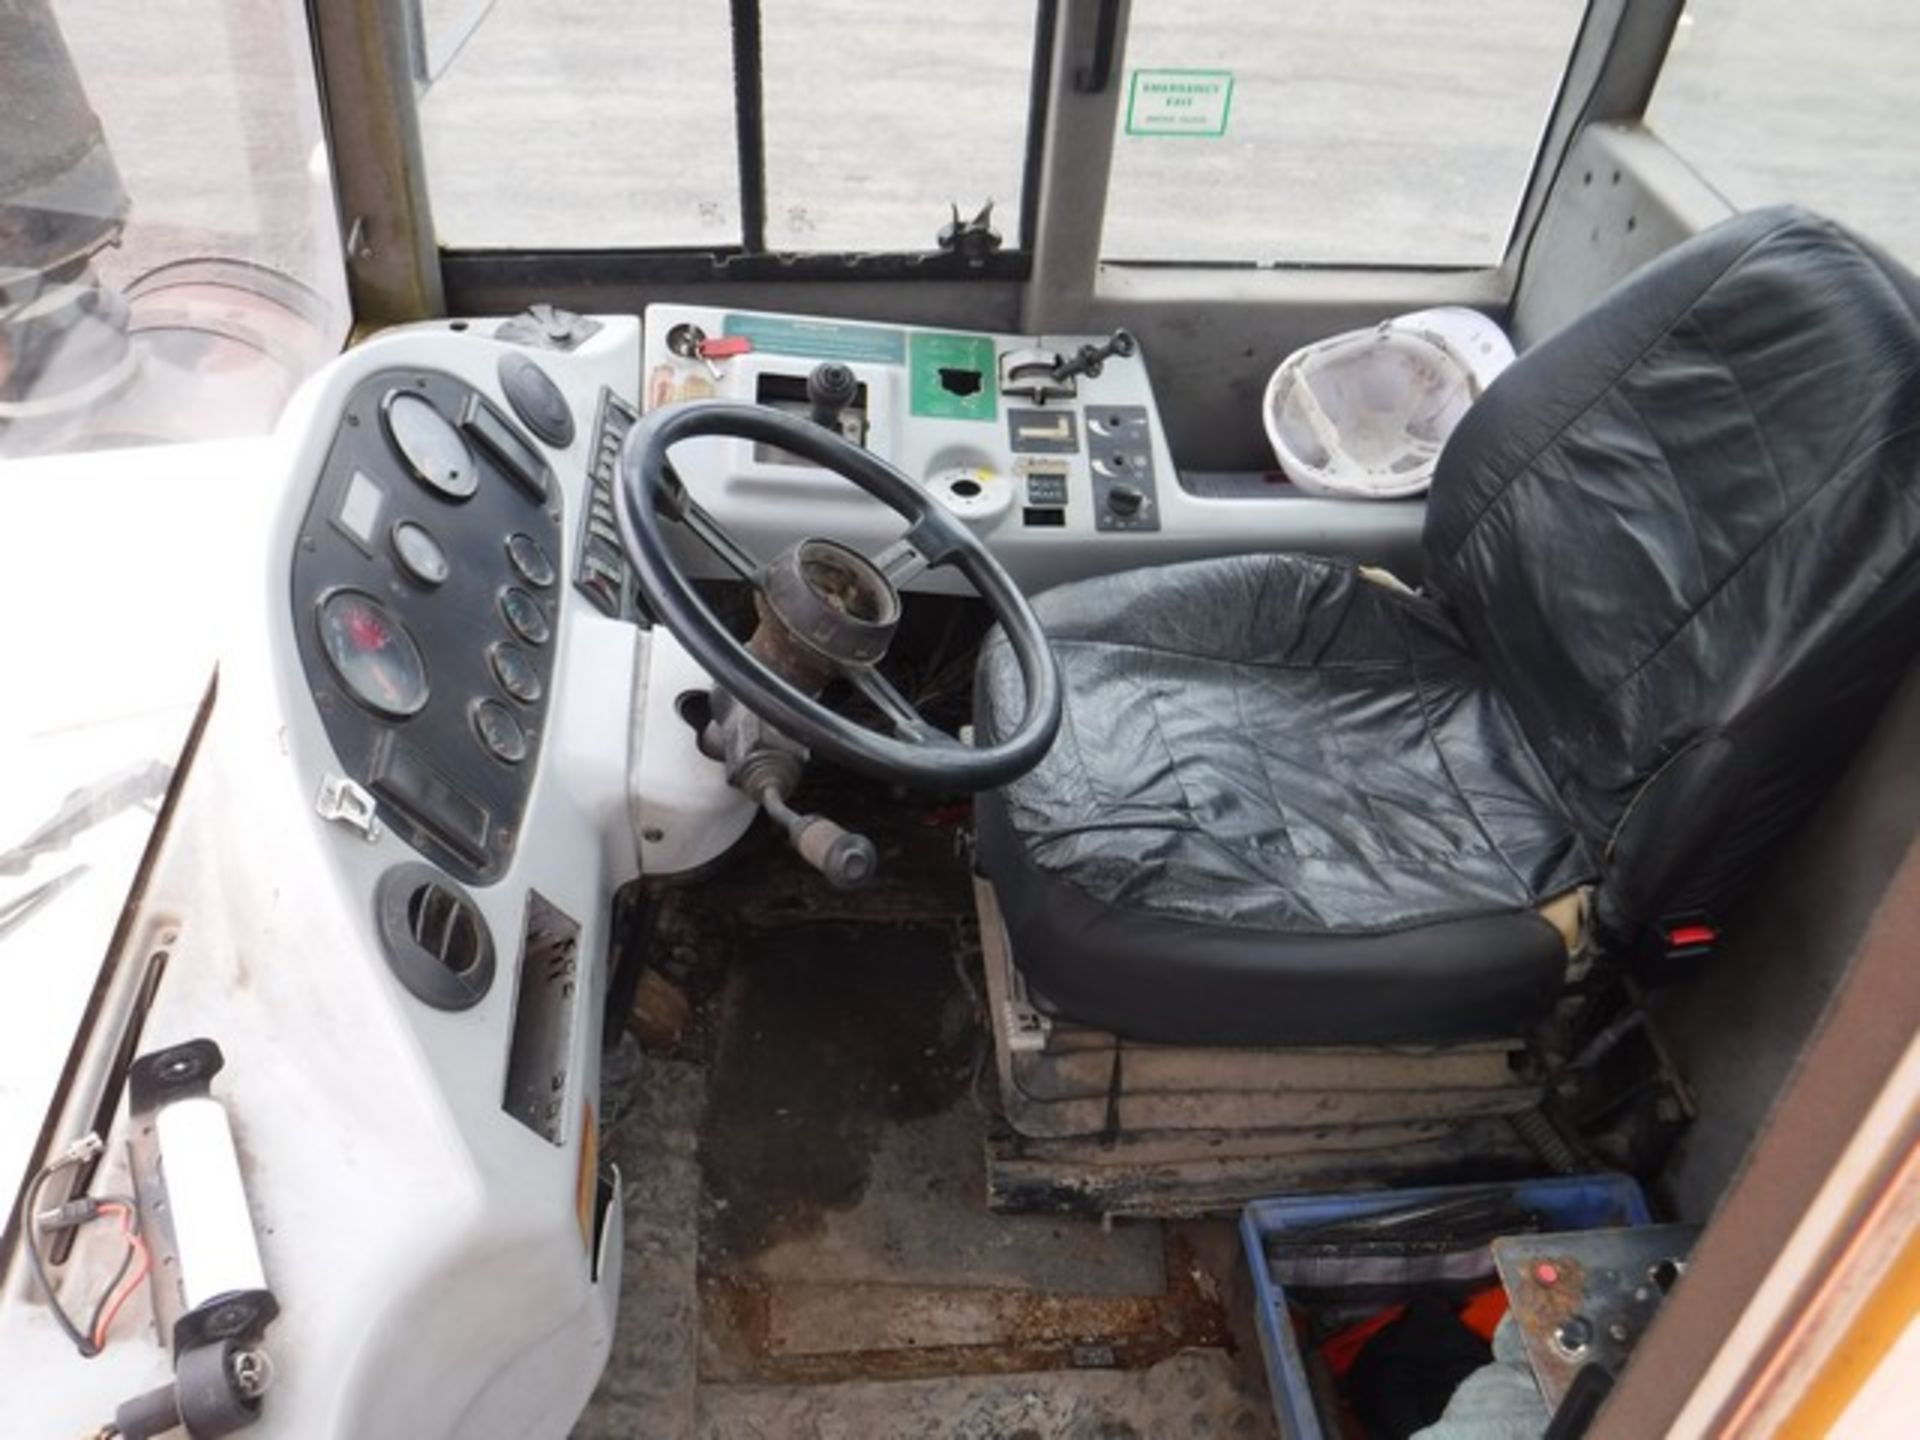 1999 TEREX TA 25, S/N 7961012, SERVICED EVERY 500HRS, USED FOR BREAKDOWN COVER - Image 5 of 18